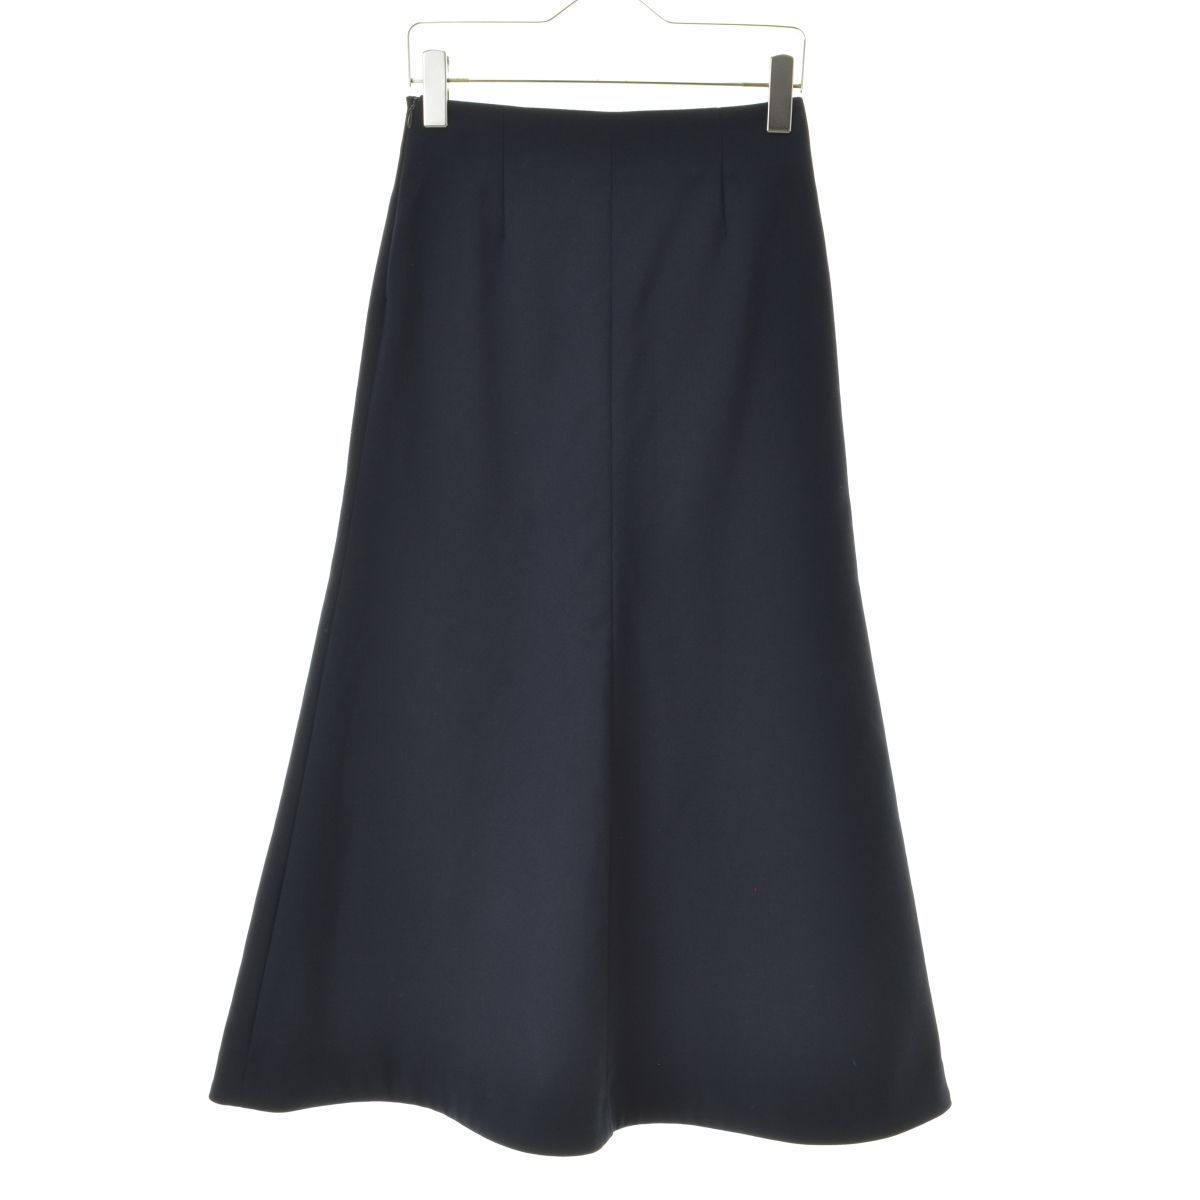 【L'APPARTEMENT】Lisiere Punch Flare Skirt ポンチフレアスカート